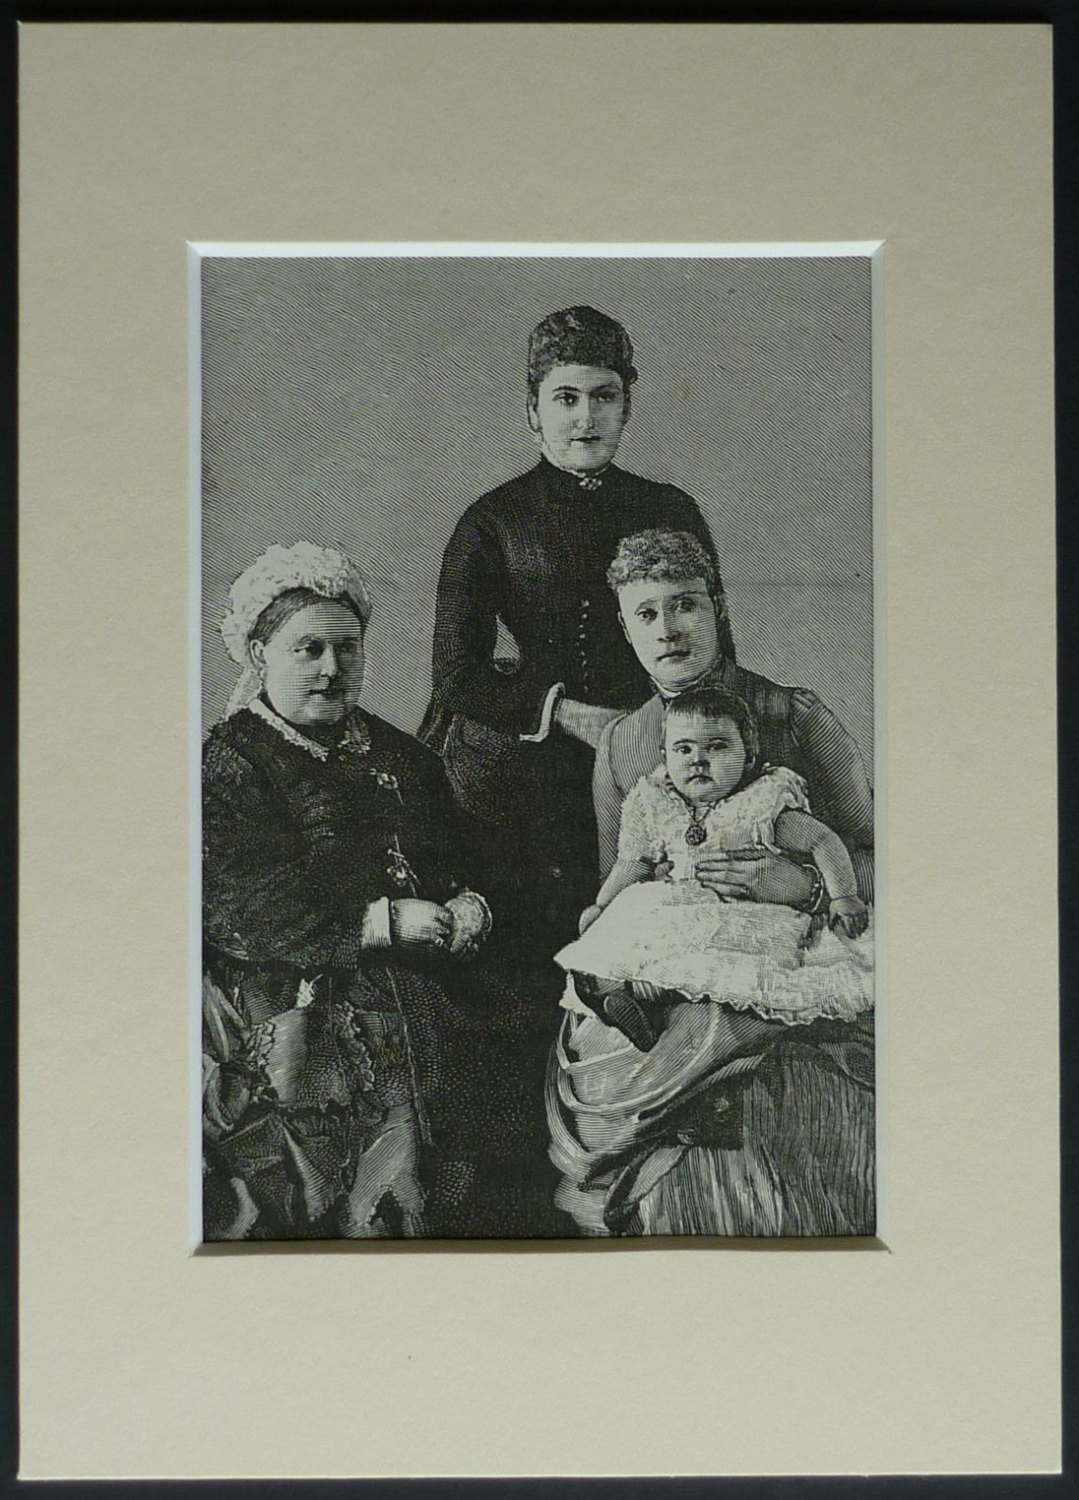 1880s Antique British Historical Print of Four Generations of Royalty - 19th century Queen Victoria portrait, Victorian wood engraving art